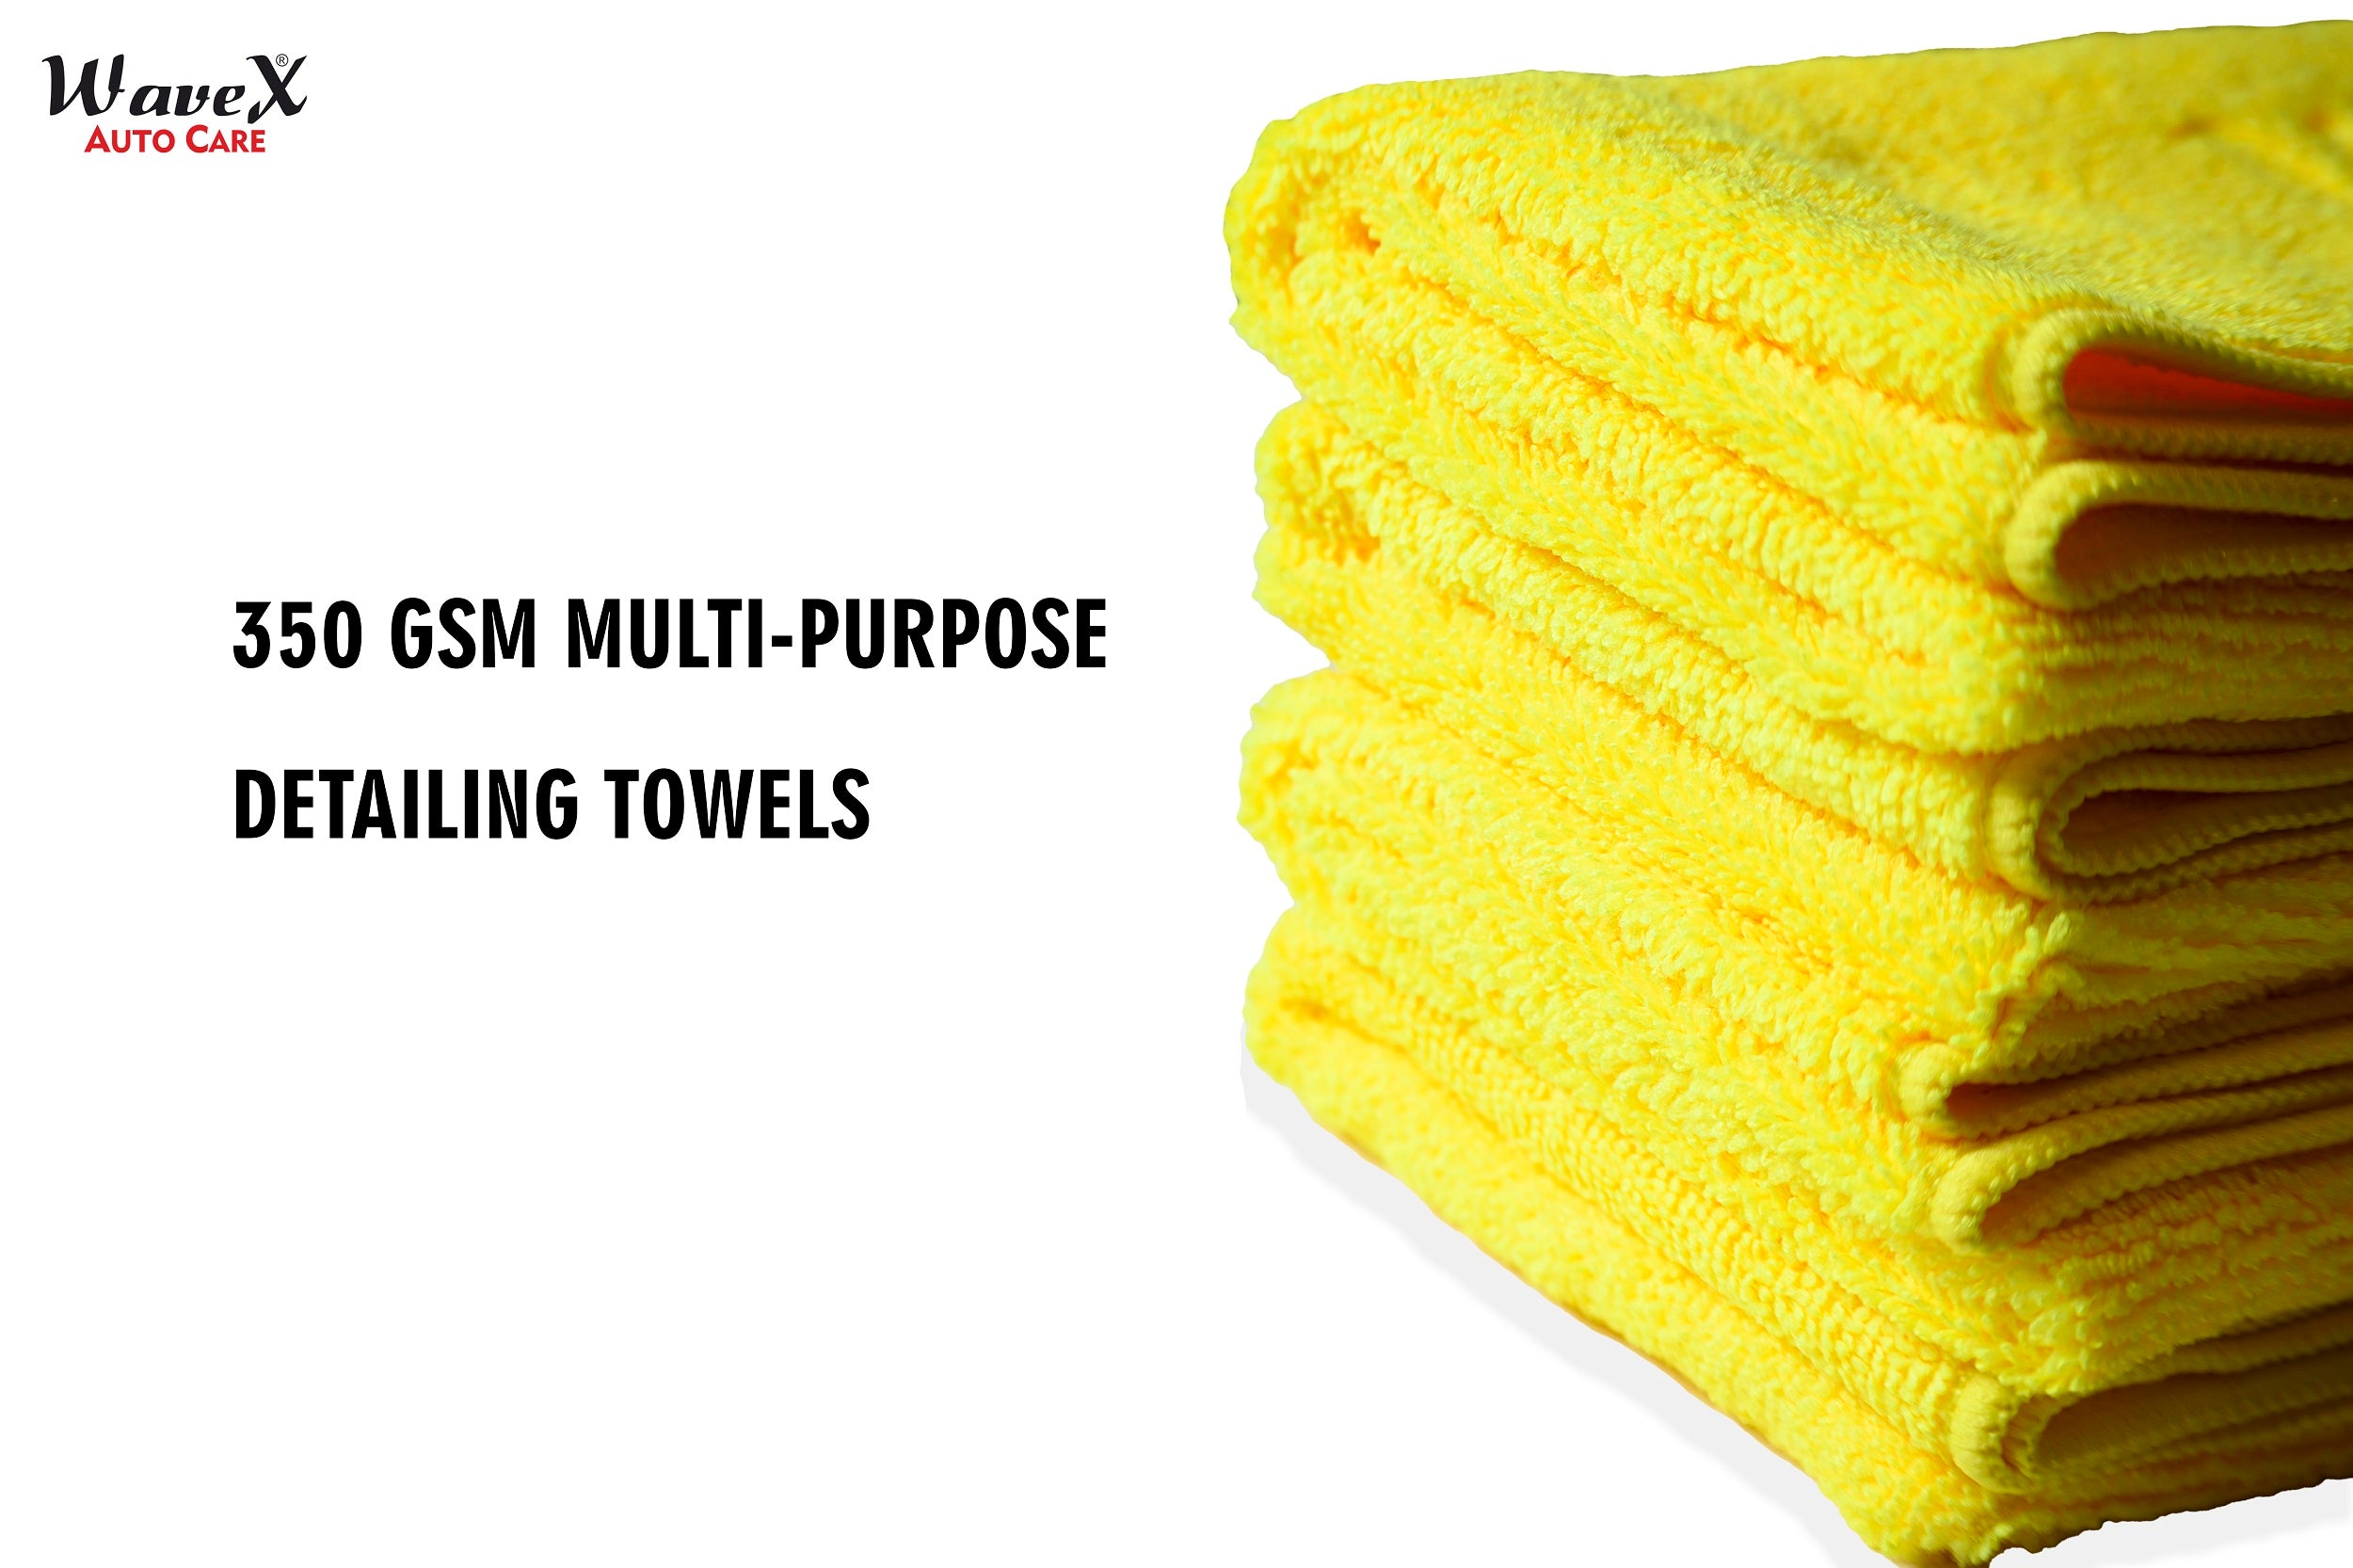 Yellow Microfiber Towels for Glass